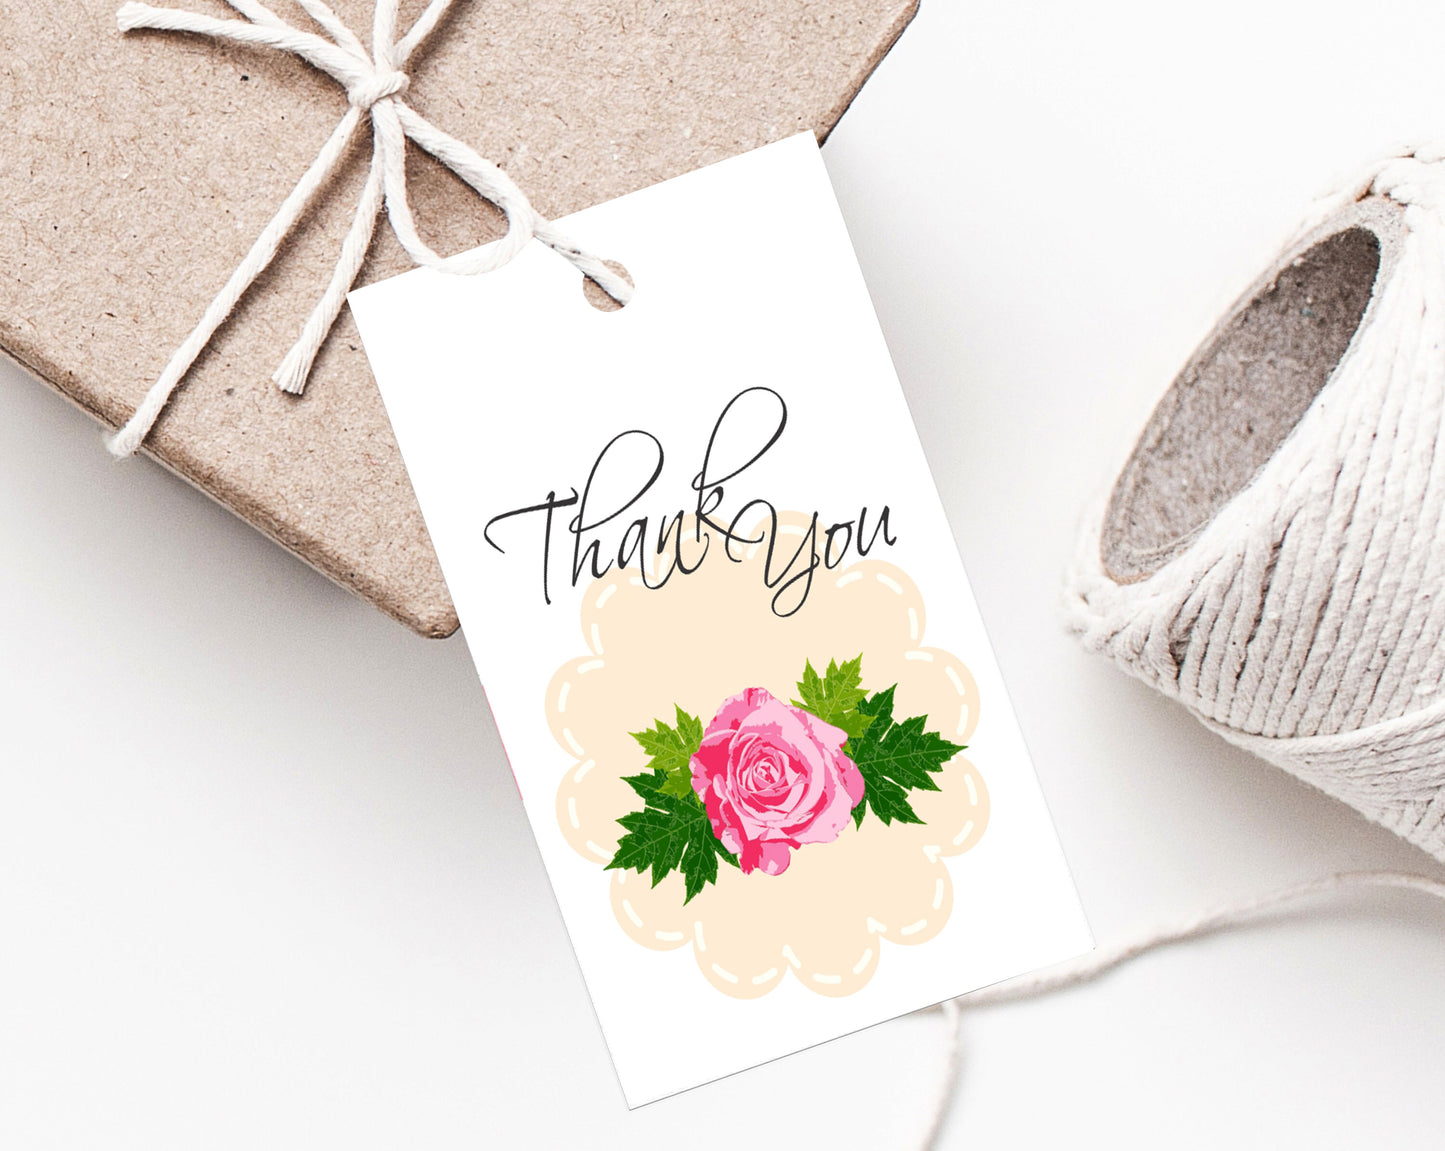 iberry's 100 pcs Thankyou Tags with Thread, Thankyou Tags for Return Gifts, Thankyou Tags for Small Business, Tags for Return Gifts-01